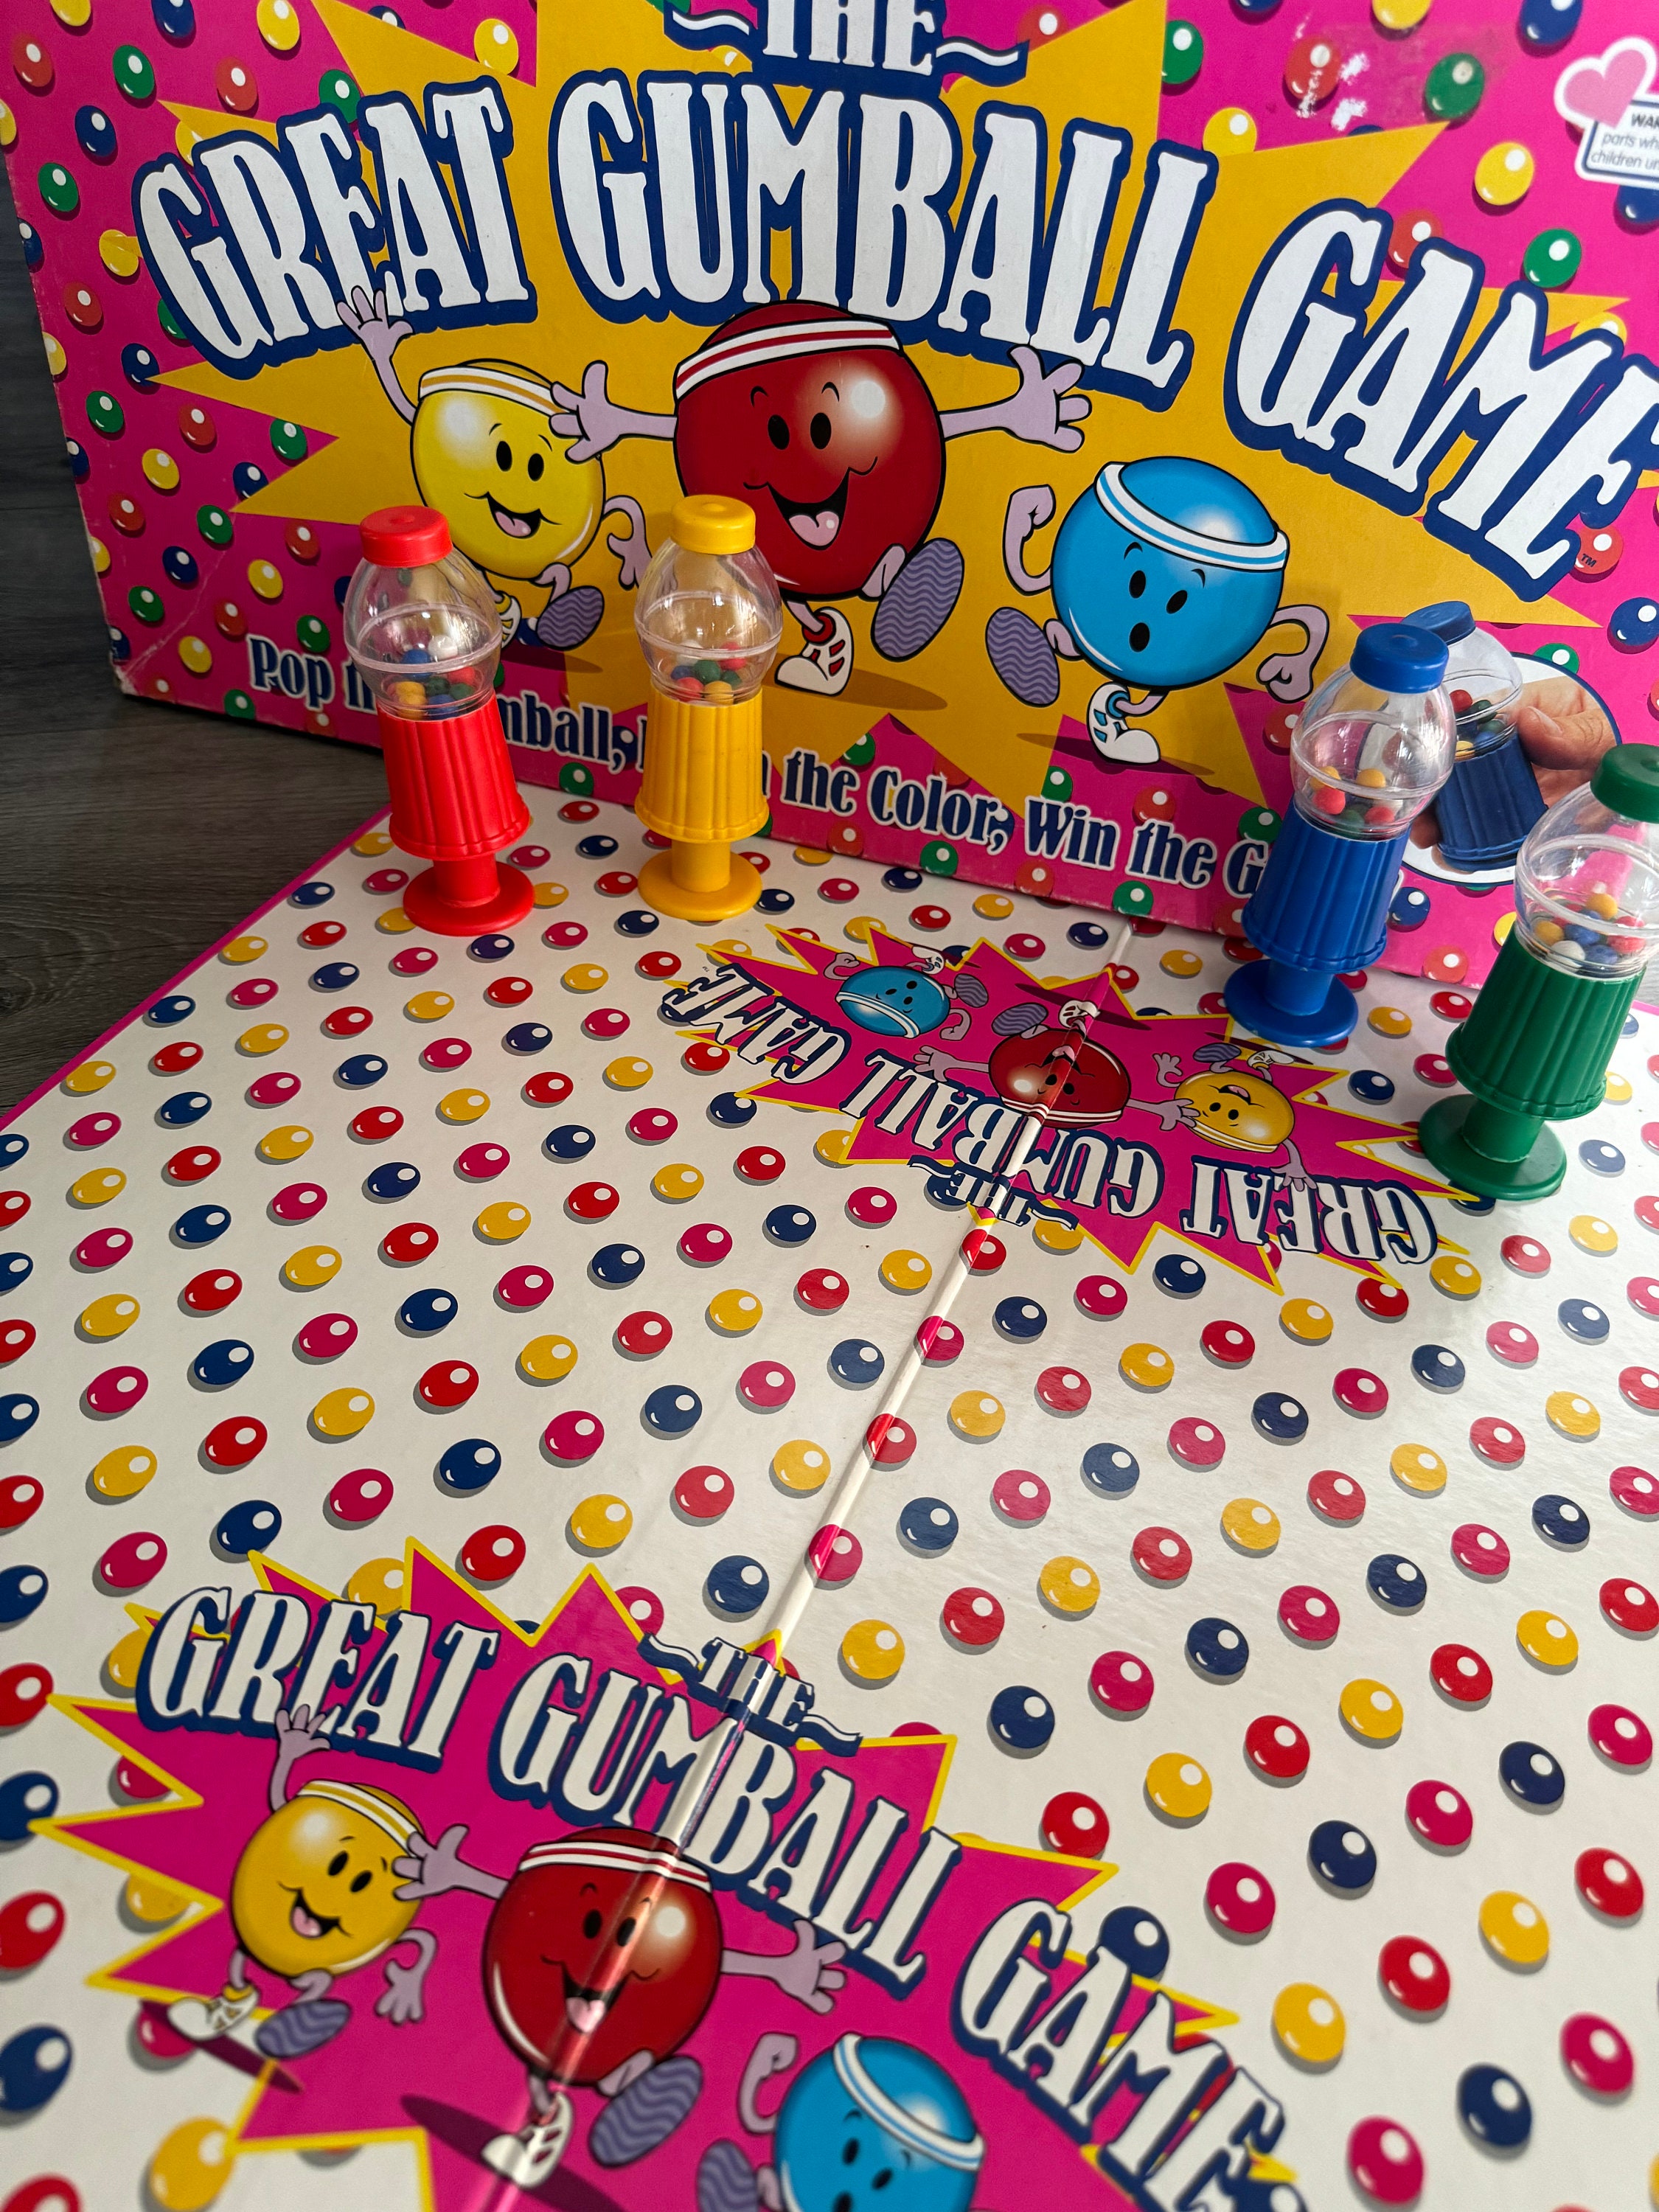 Great Gumball Game - 1995 - RoseArt - Great Condition 